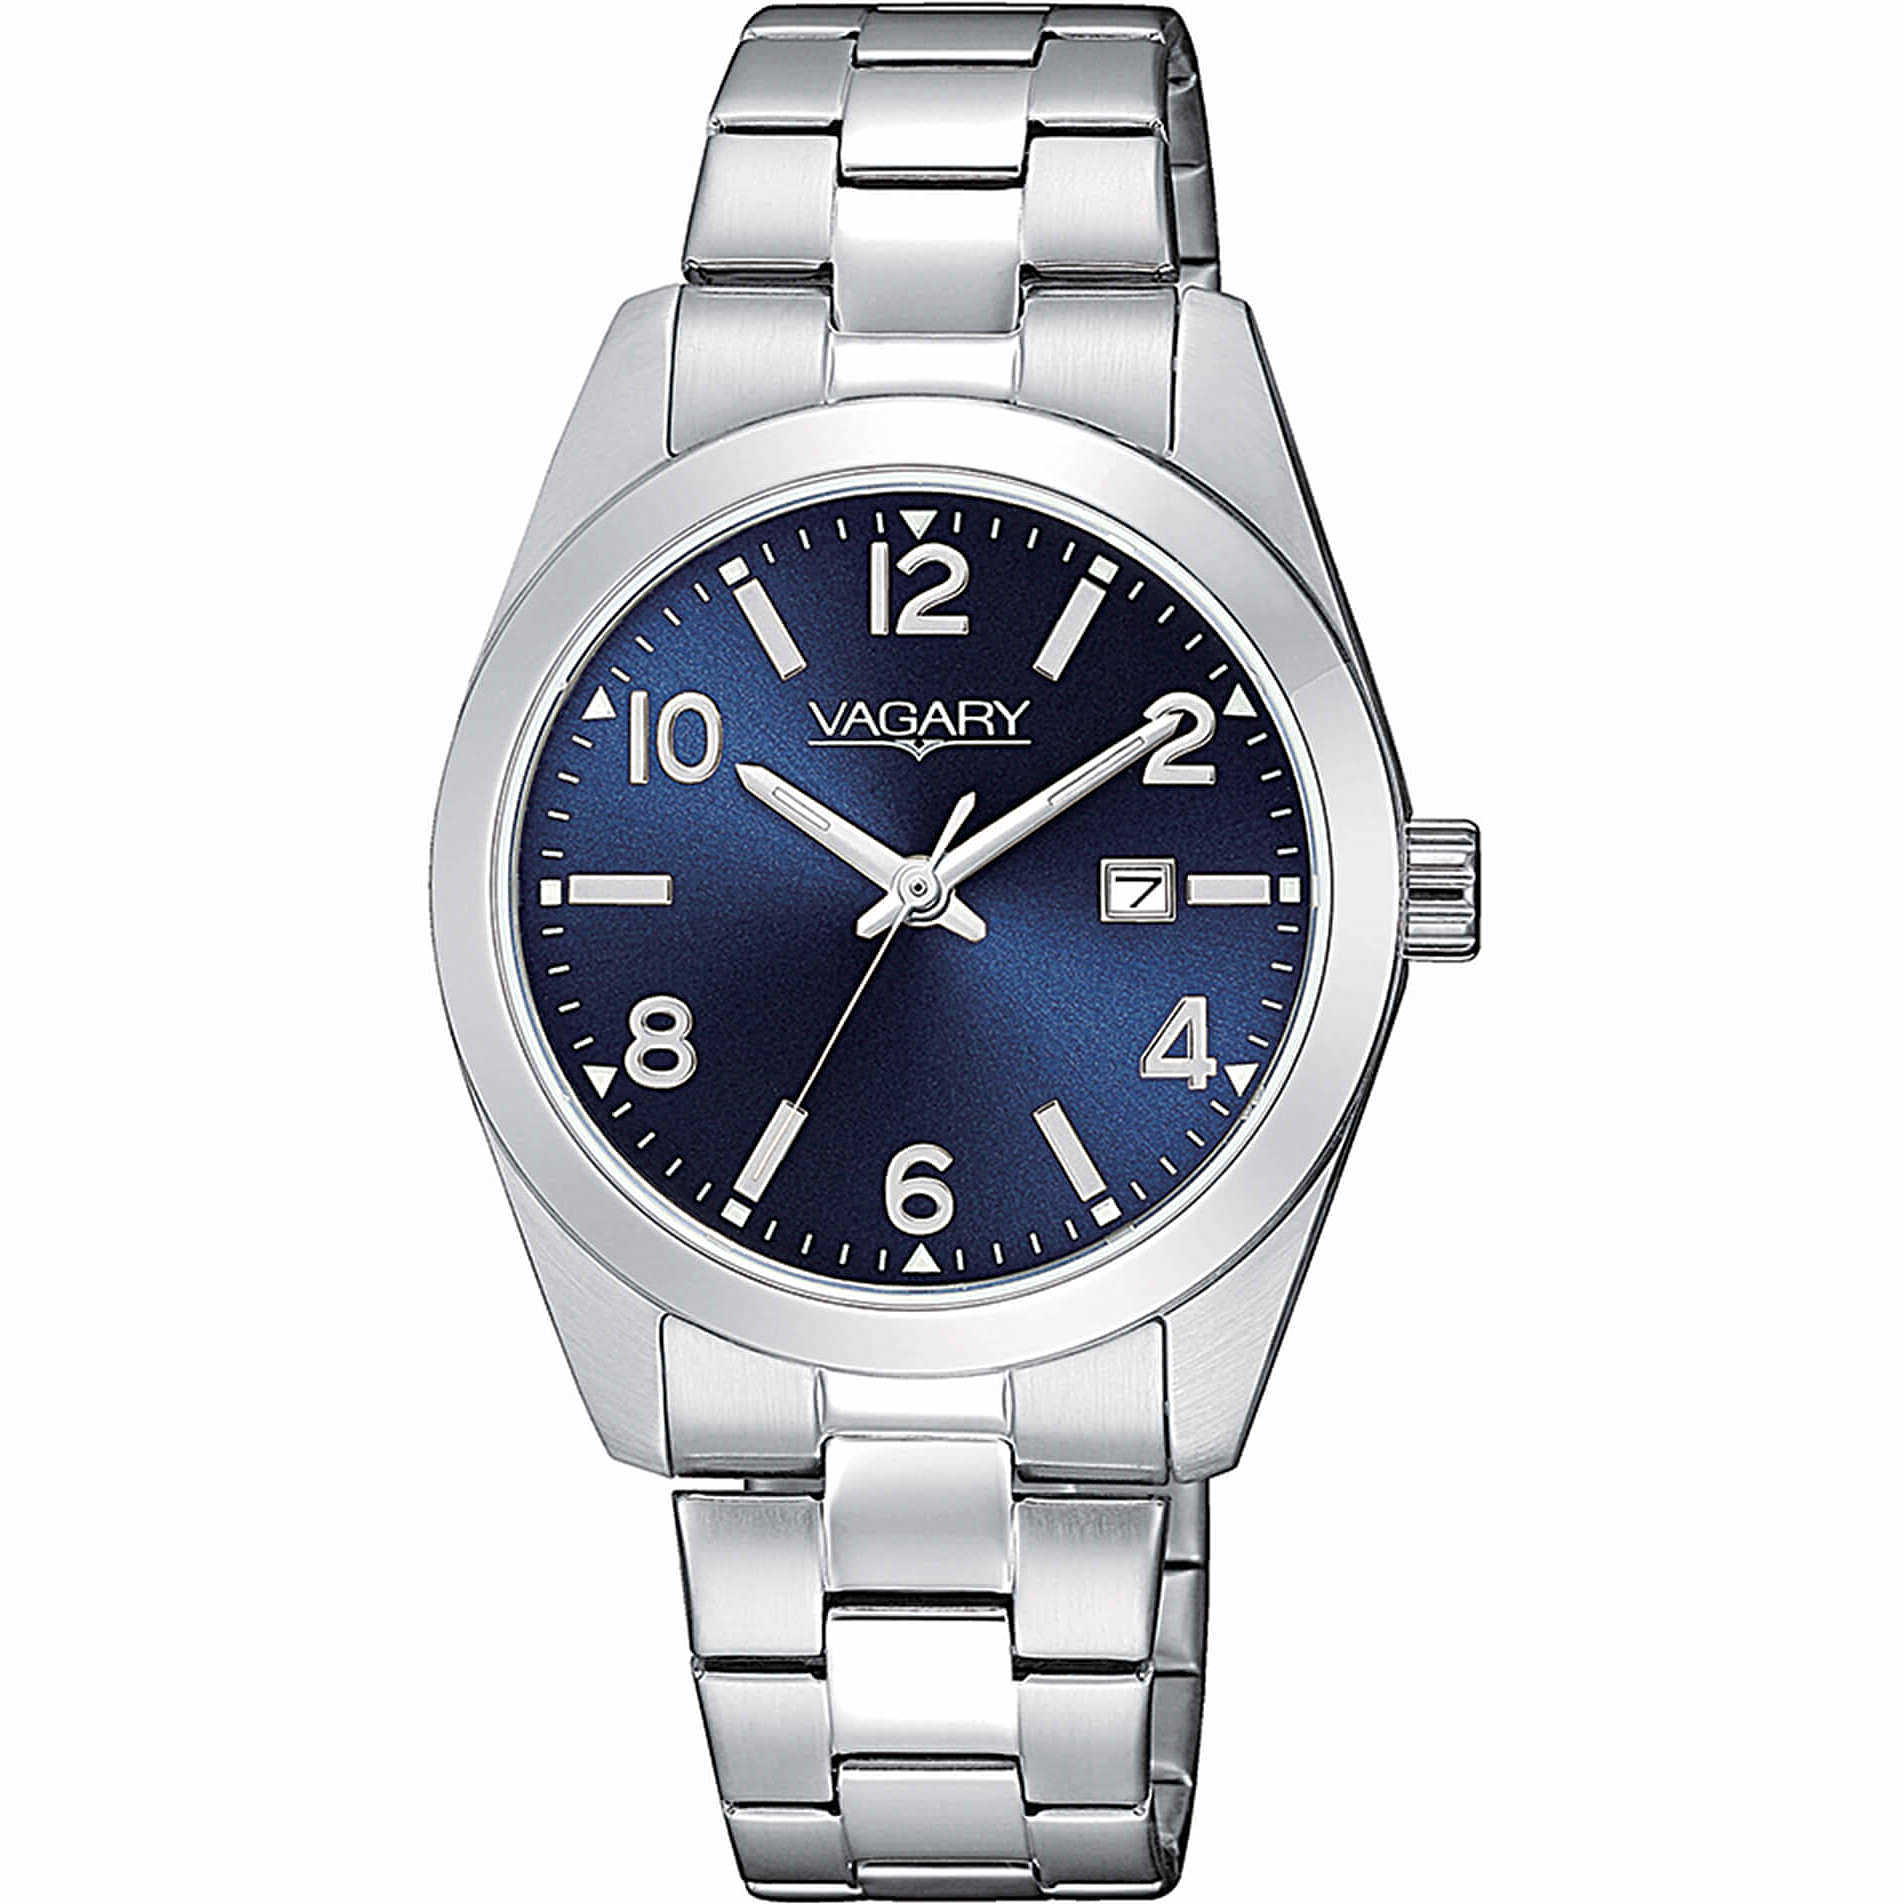 Vagary Watch by Citizen Timeless Lady IU2-715-71